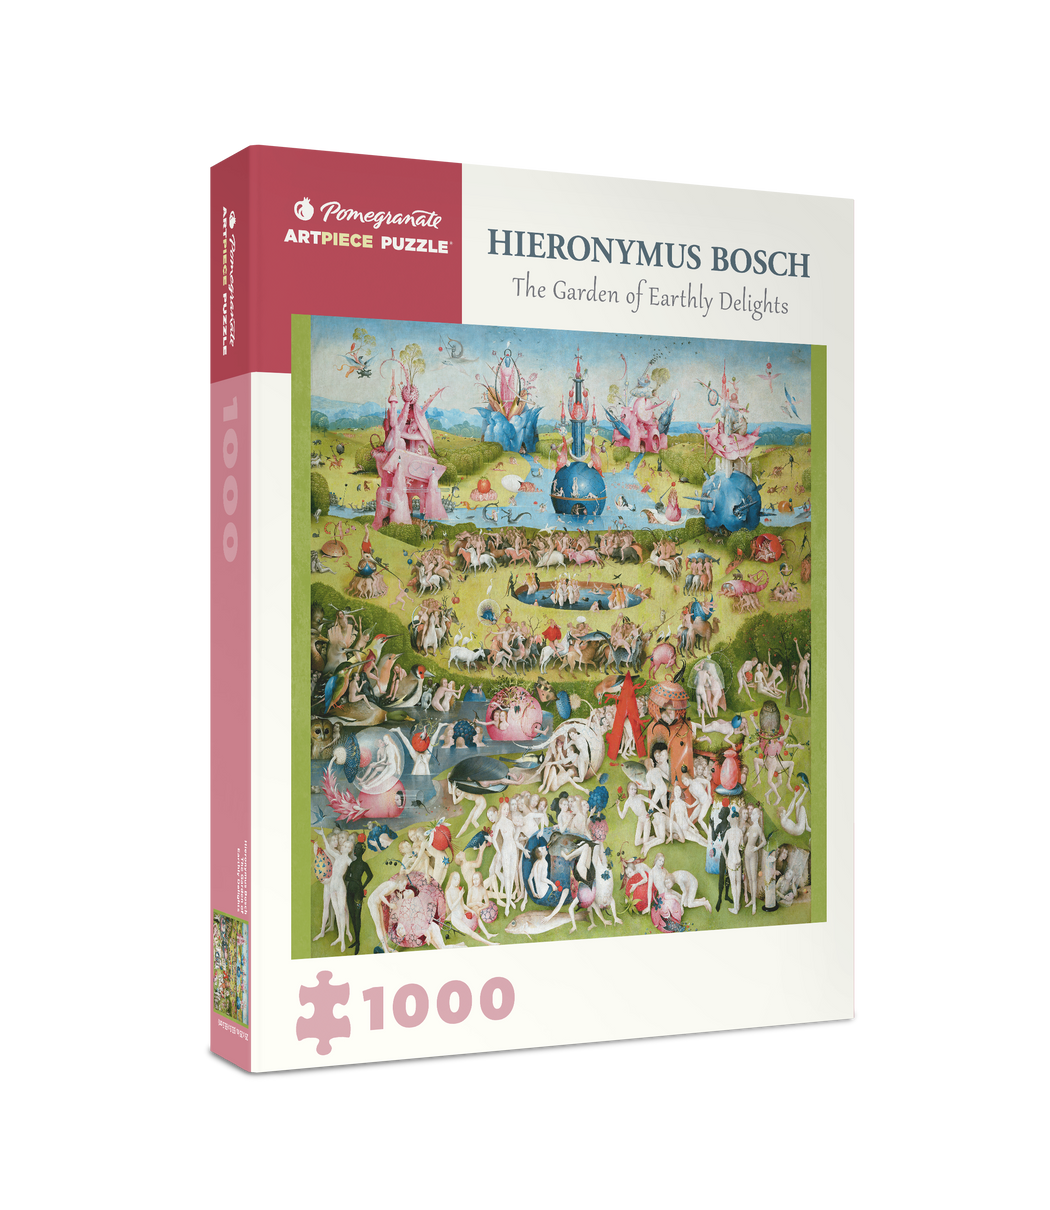 Hieronymus Bosch: The Garden of Earthly Delights 1000-Piece Jigsaw Puzzle_Primary